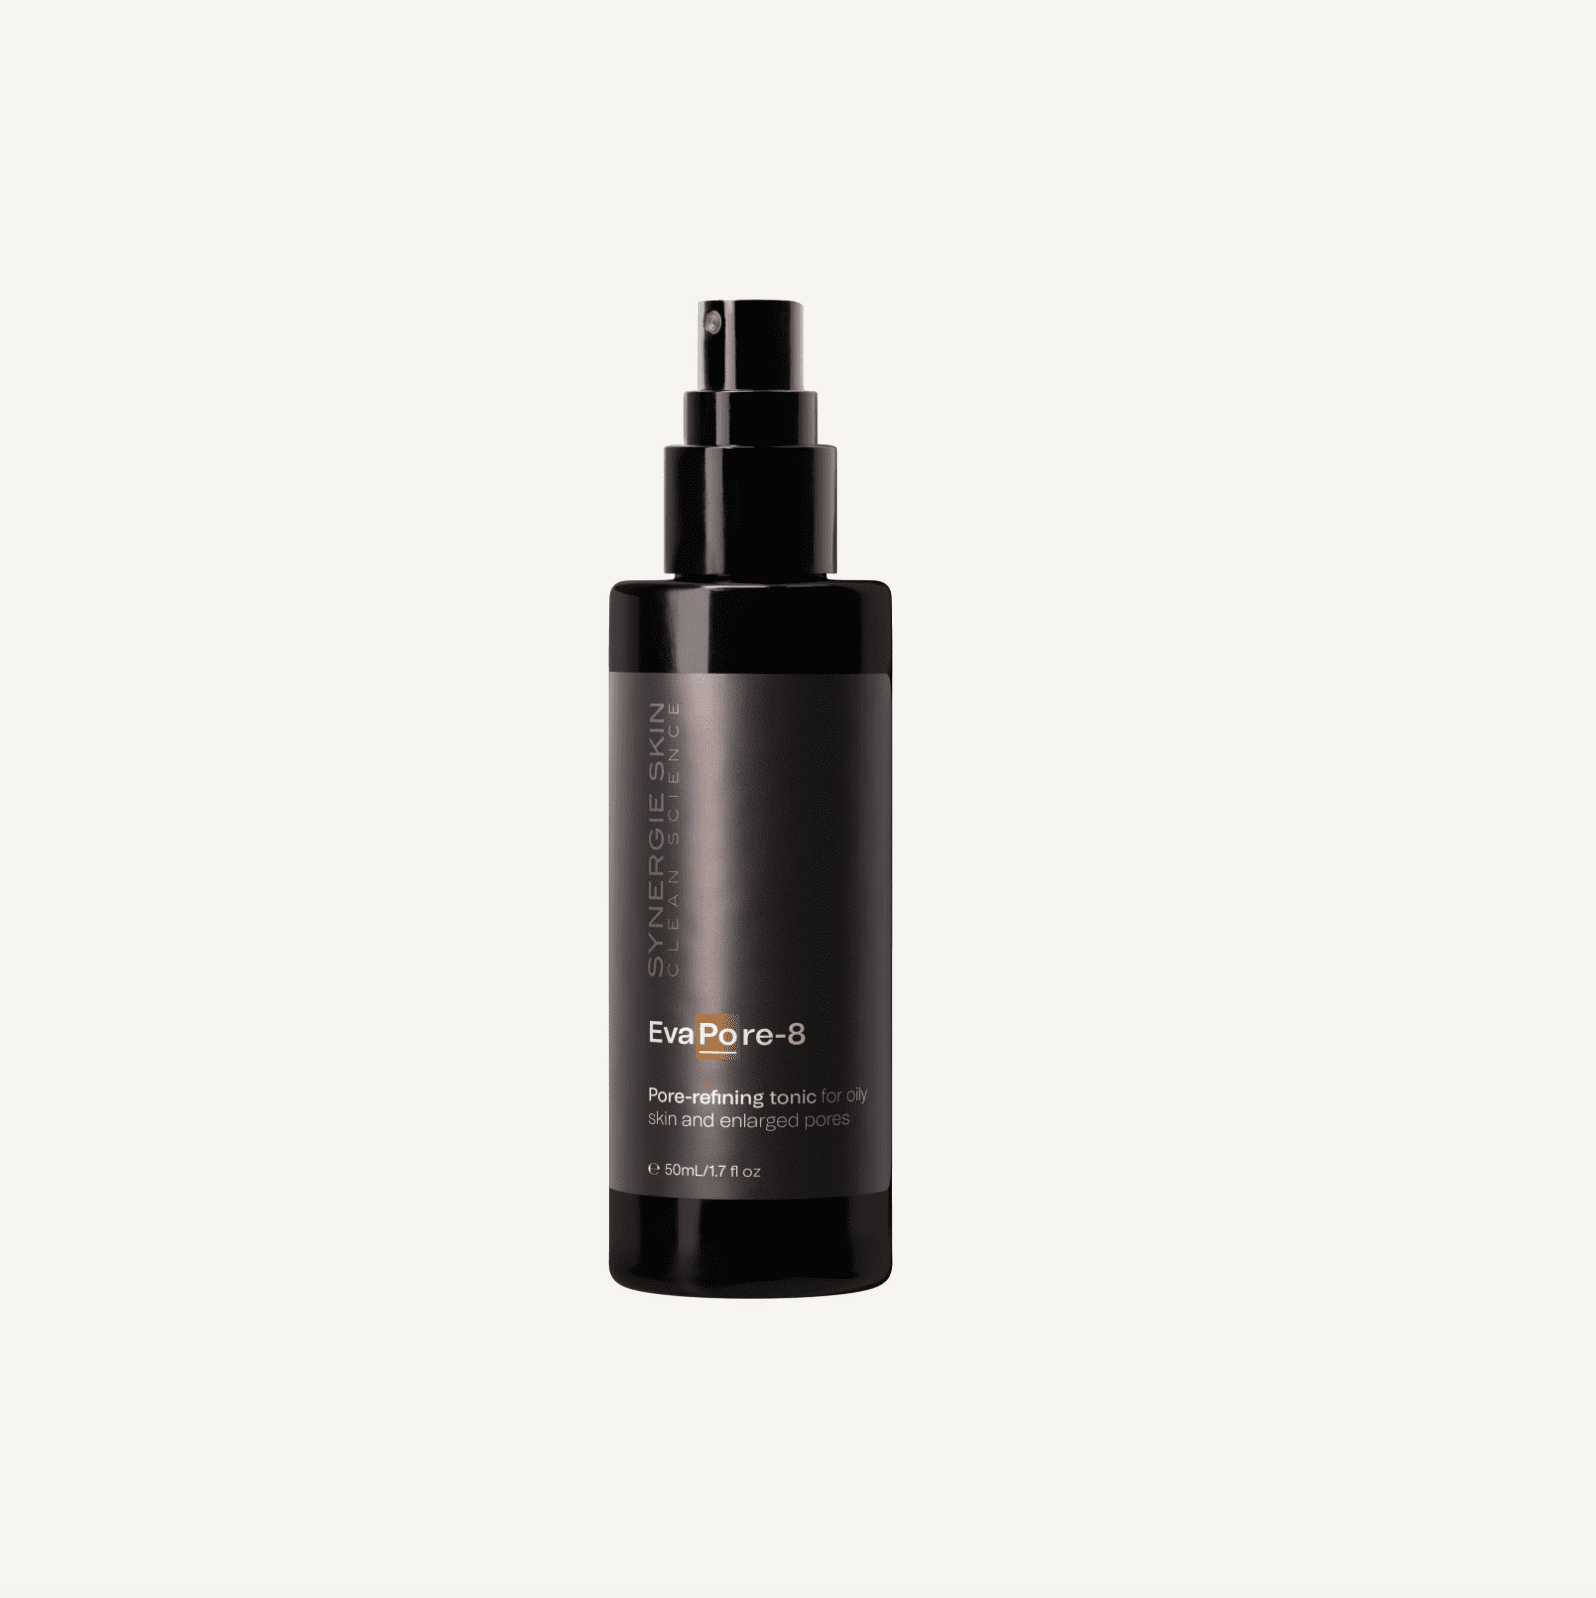 A black, cylindrical spray bottle labeled "eva-pore-8" by synargésskin. the bottle features minimalist design and text expressing its purpose as a pore-minimizing tonic.